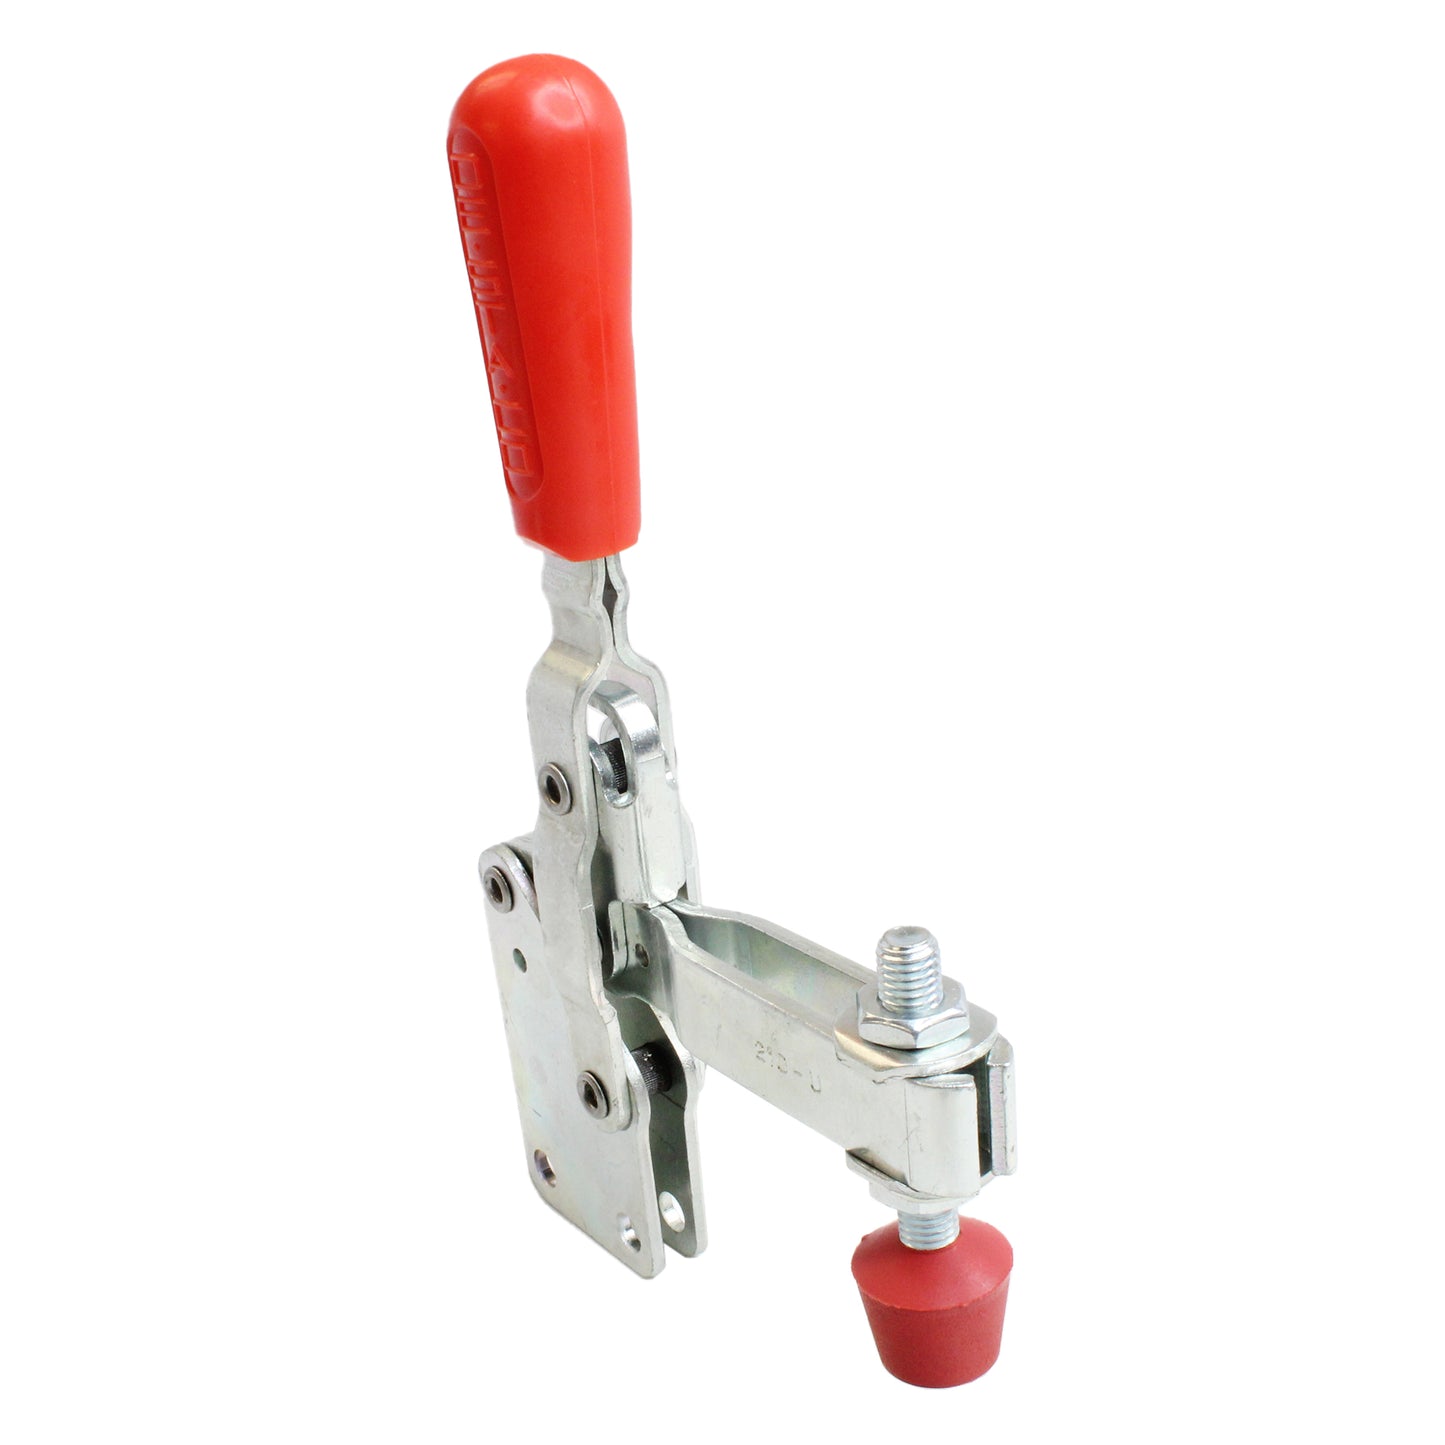 Destaco 210-UB Vertical Hold-Down Toggle Locking Clamp